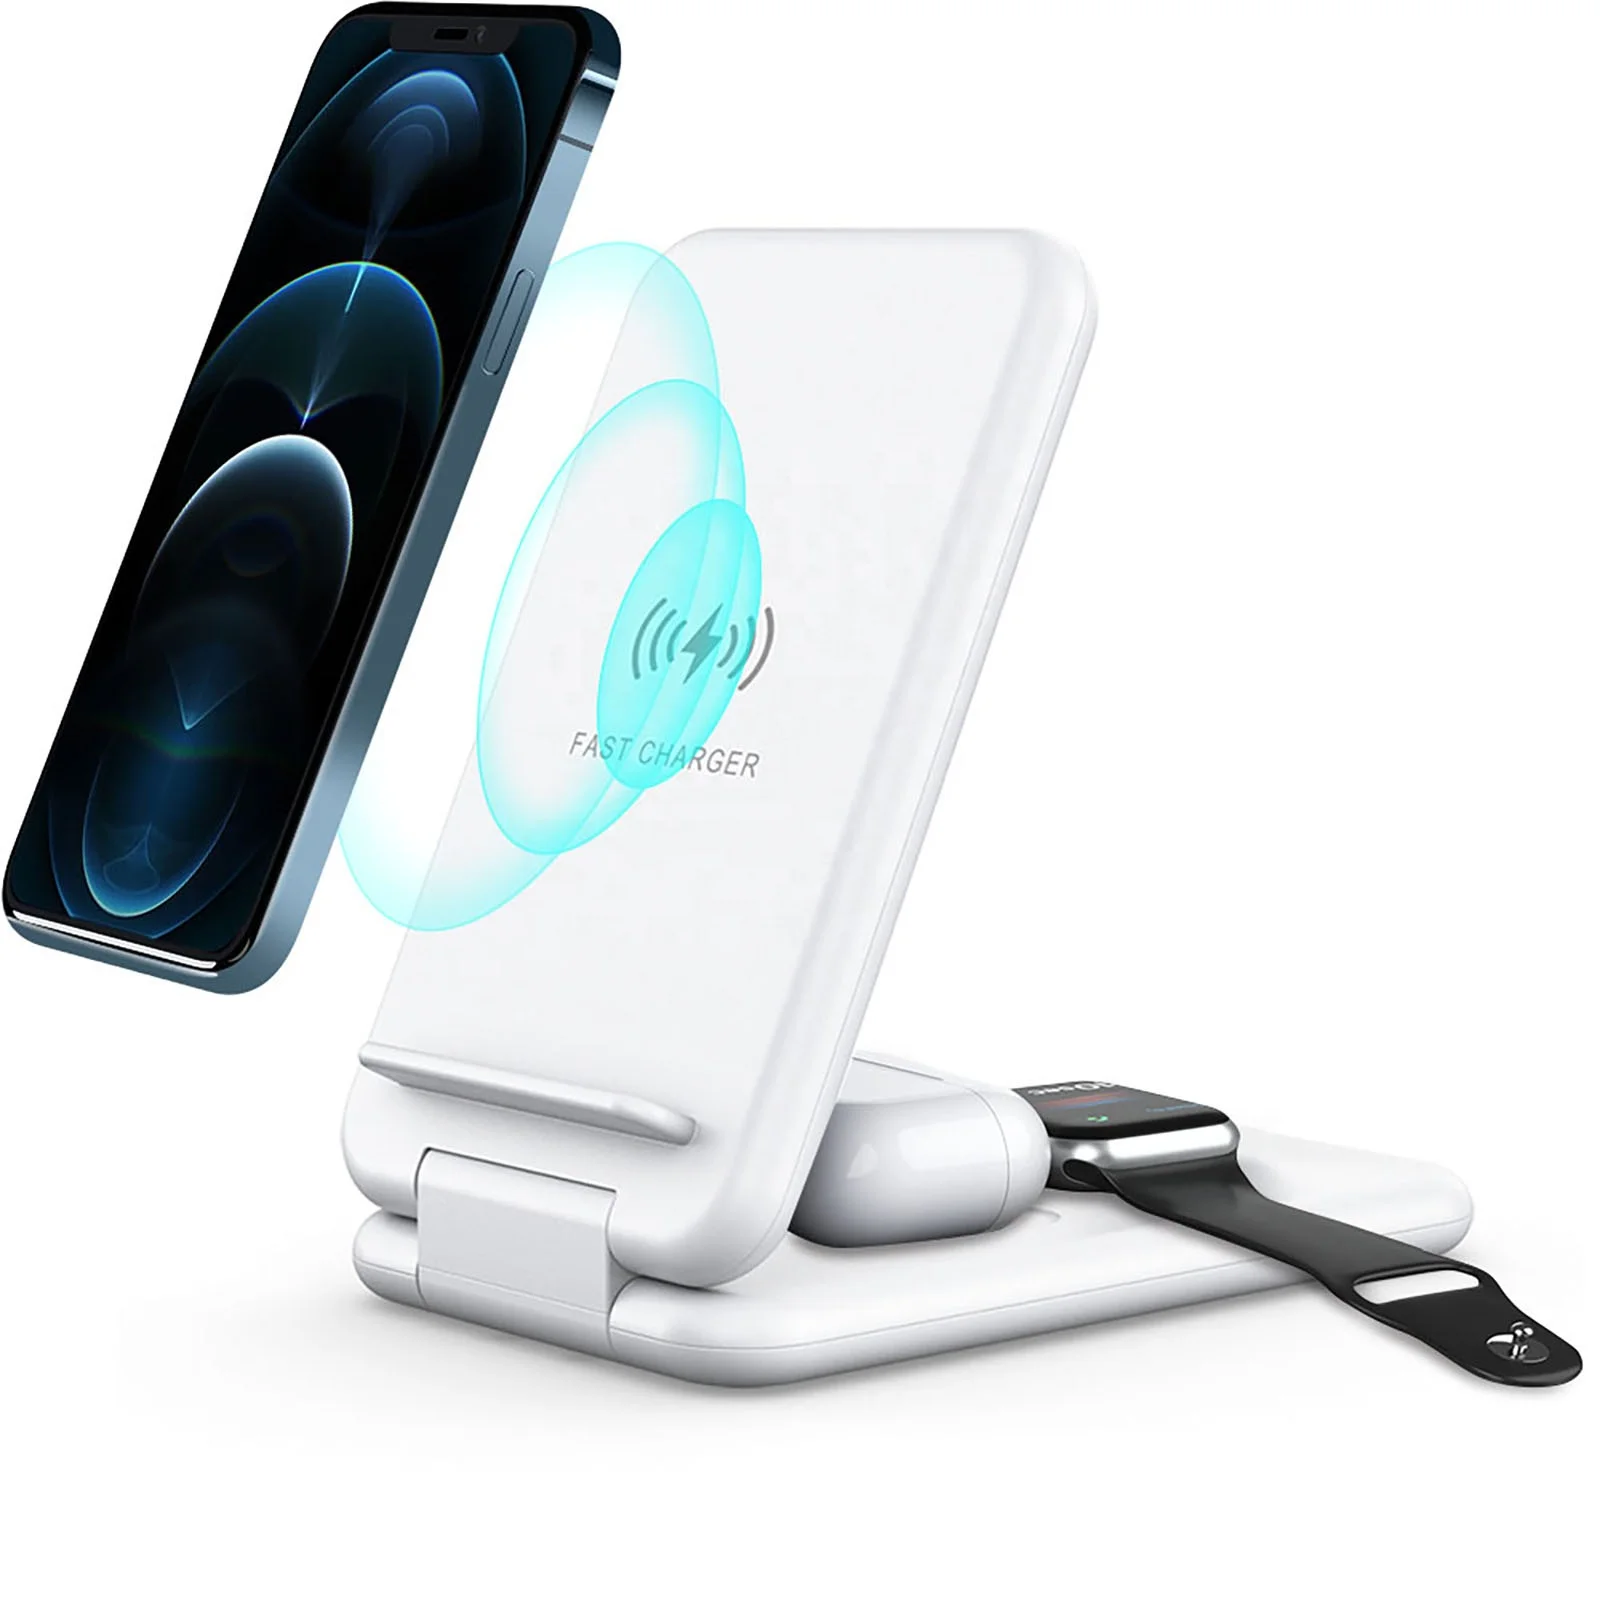 

New Model 2021 Universal Foldable 15W 10W Fast Charge White Qi 3in1 Phone Wireless Charger Stand 3 in 1 Charging Dock Station, Black, white, or custom color